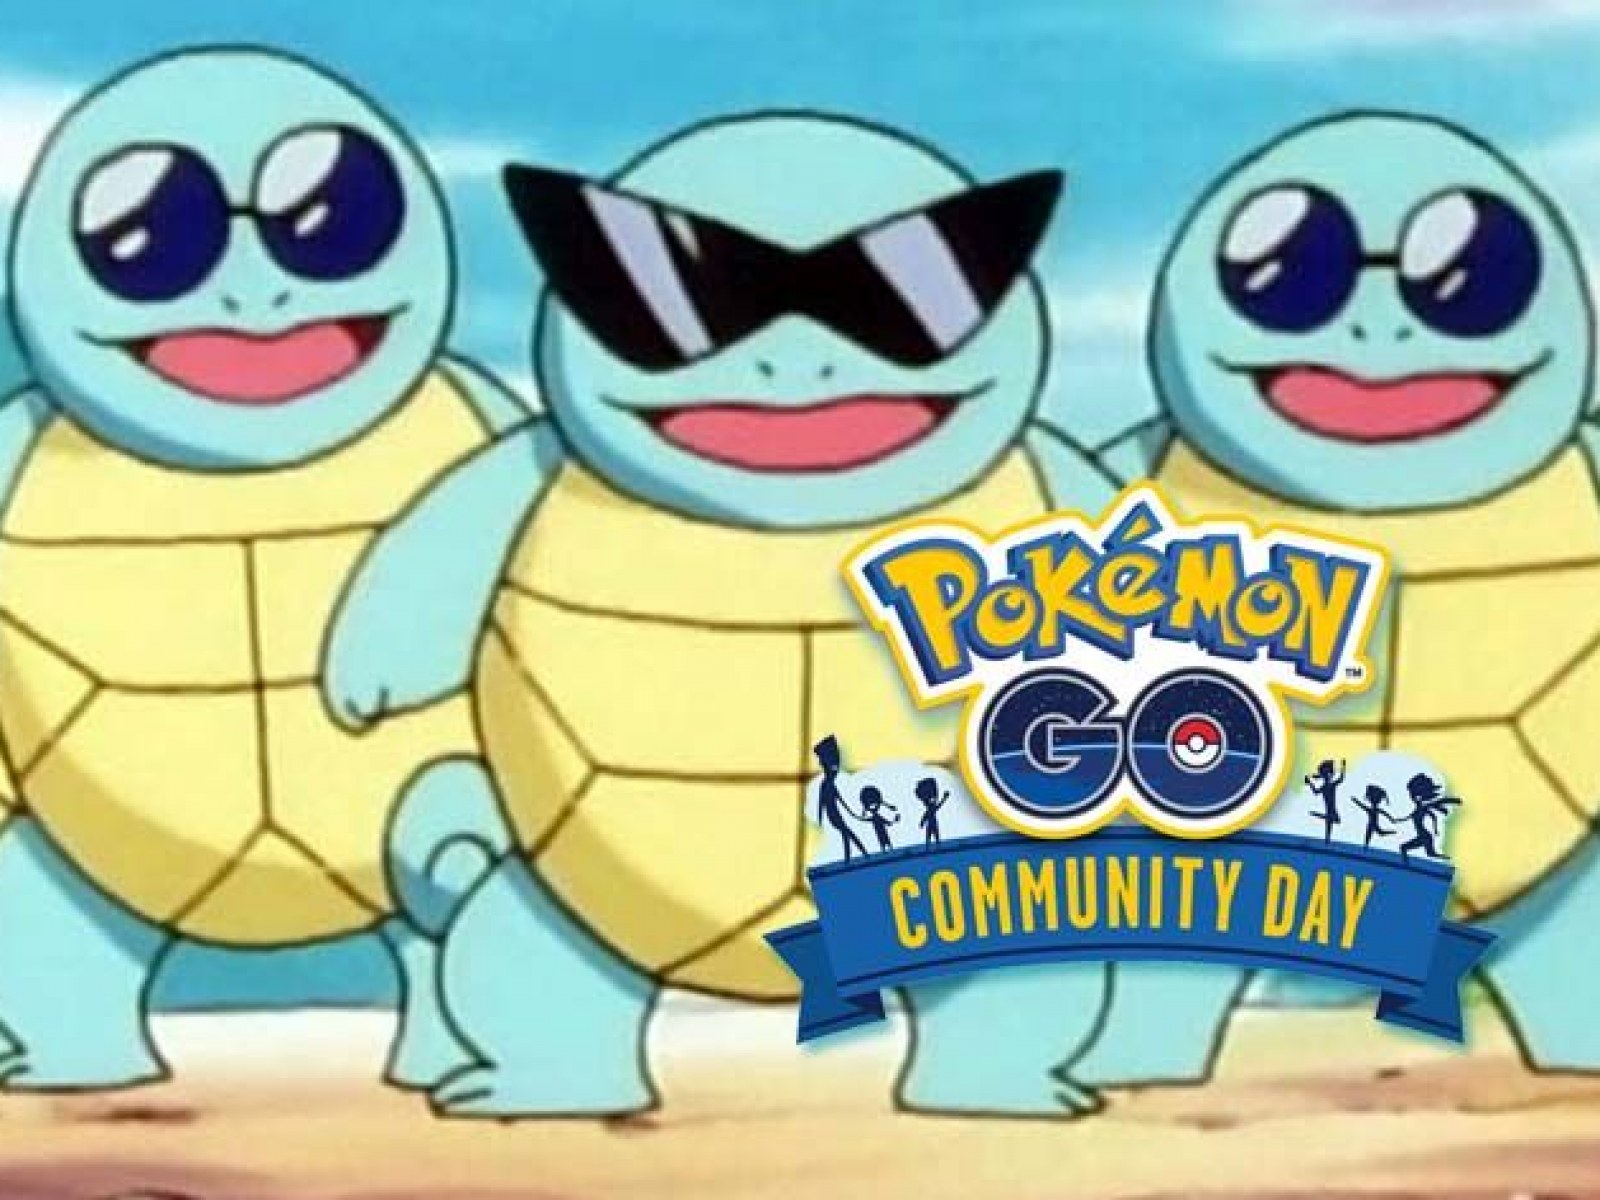 Pokémon Go' Community Day: Shiny Squirtle, Sunglasses and Start Time